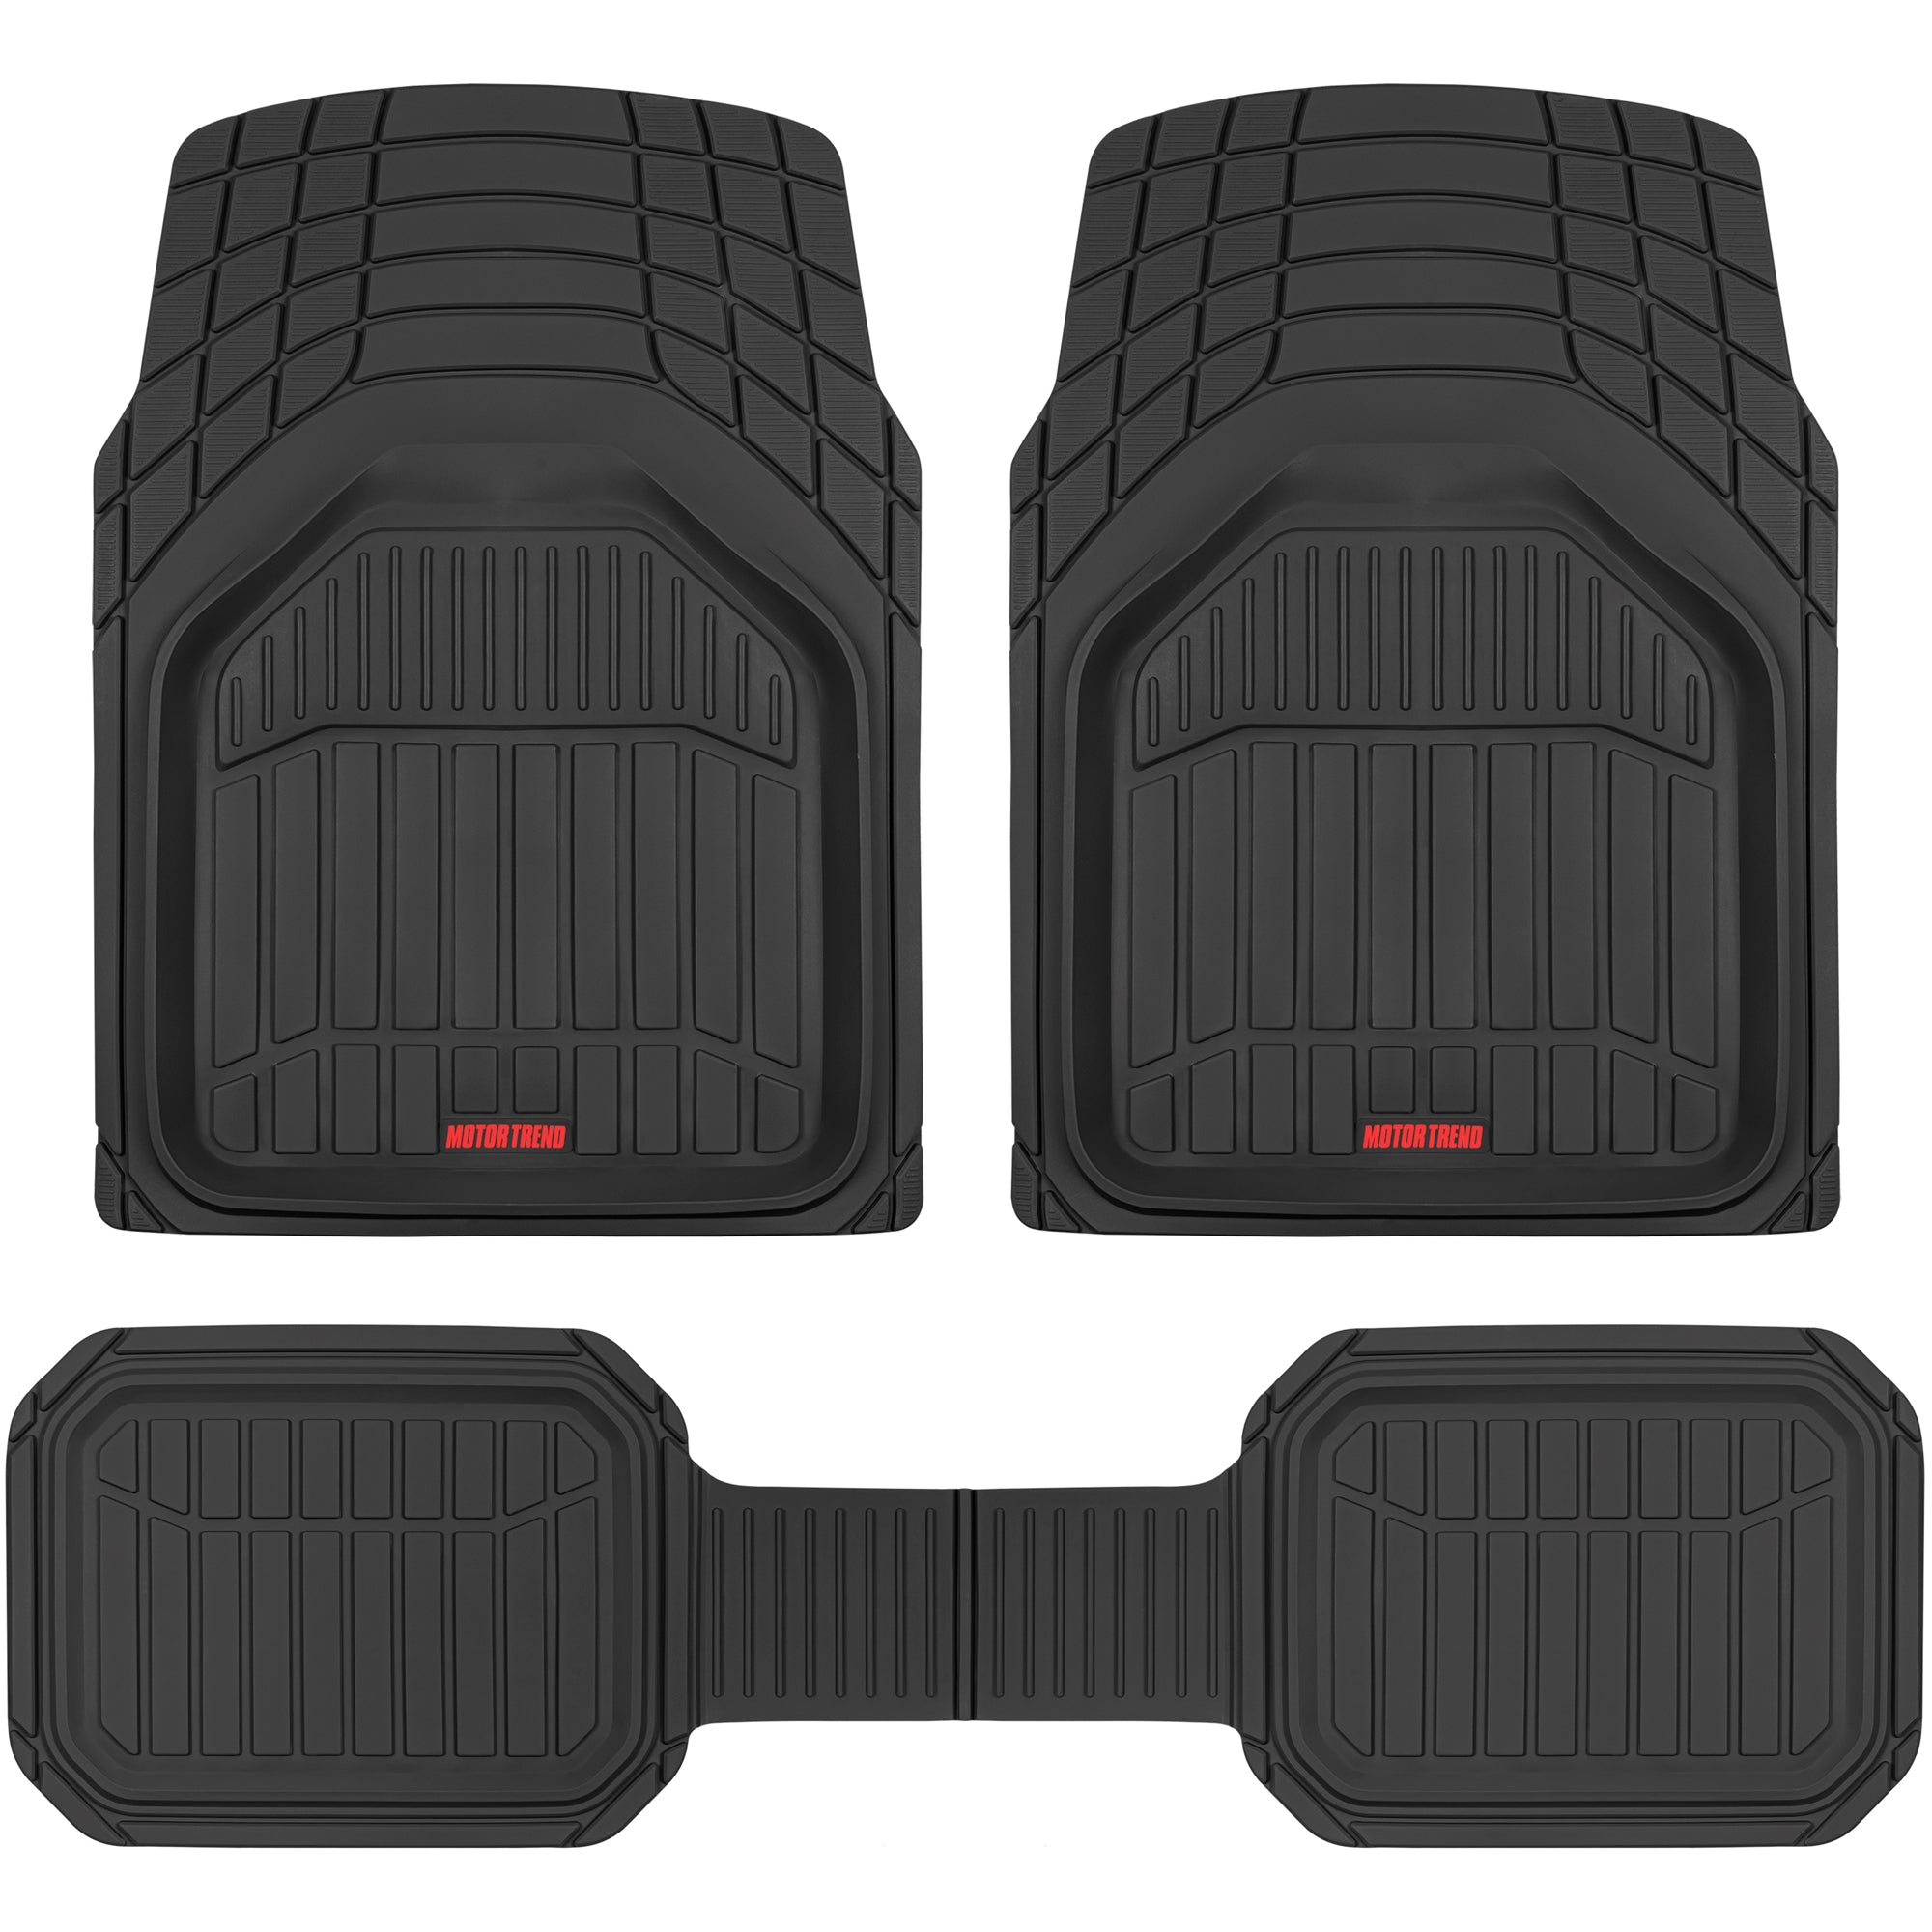 Motor Trend 943-BG FlexTough Defender Car Floor Mats -Next Generation  Deep Dish Heavy Duty Contour Liners for Car SUV Truck & Van-All Weather Protection, Trim to Fit Most Vehicles